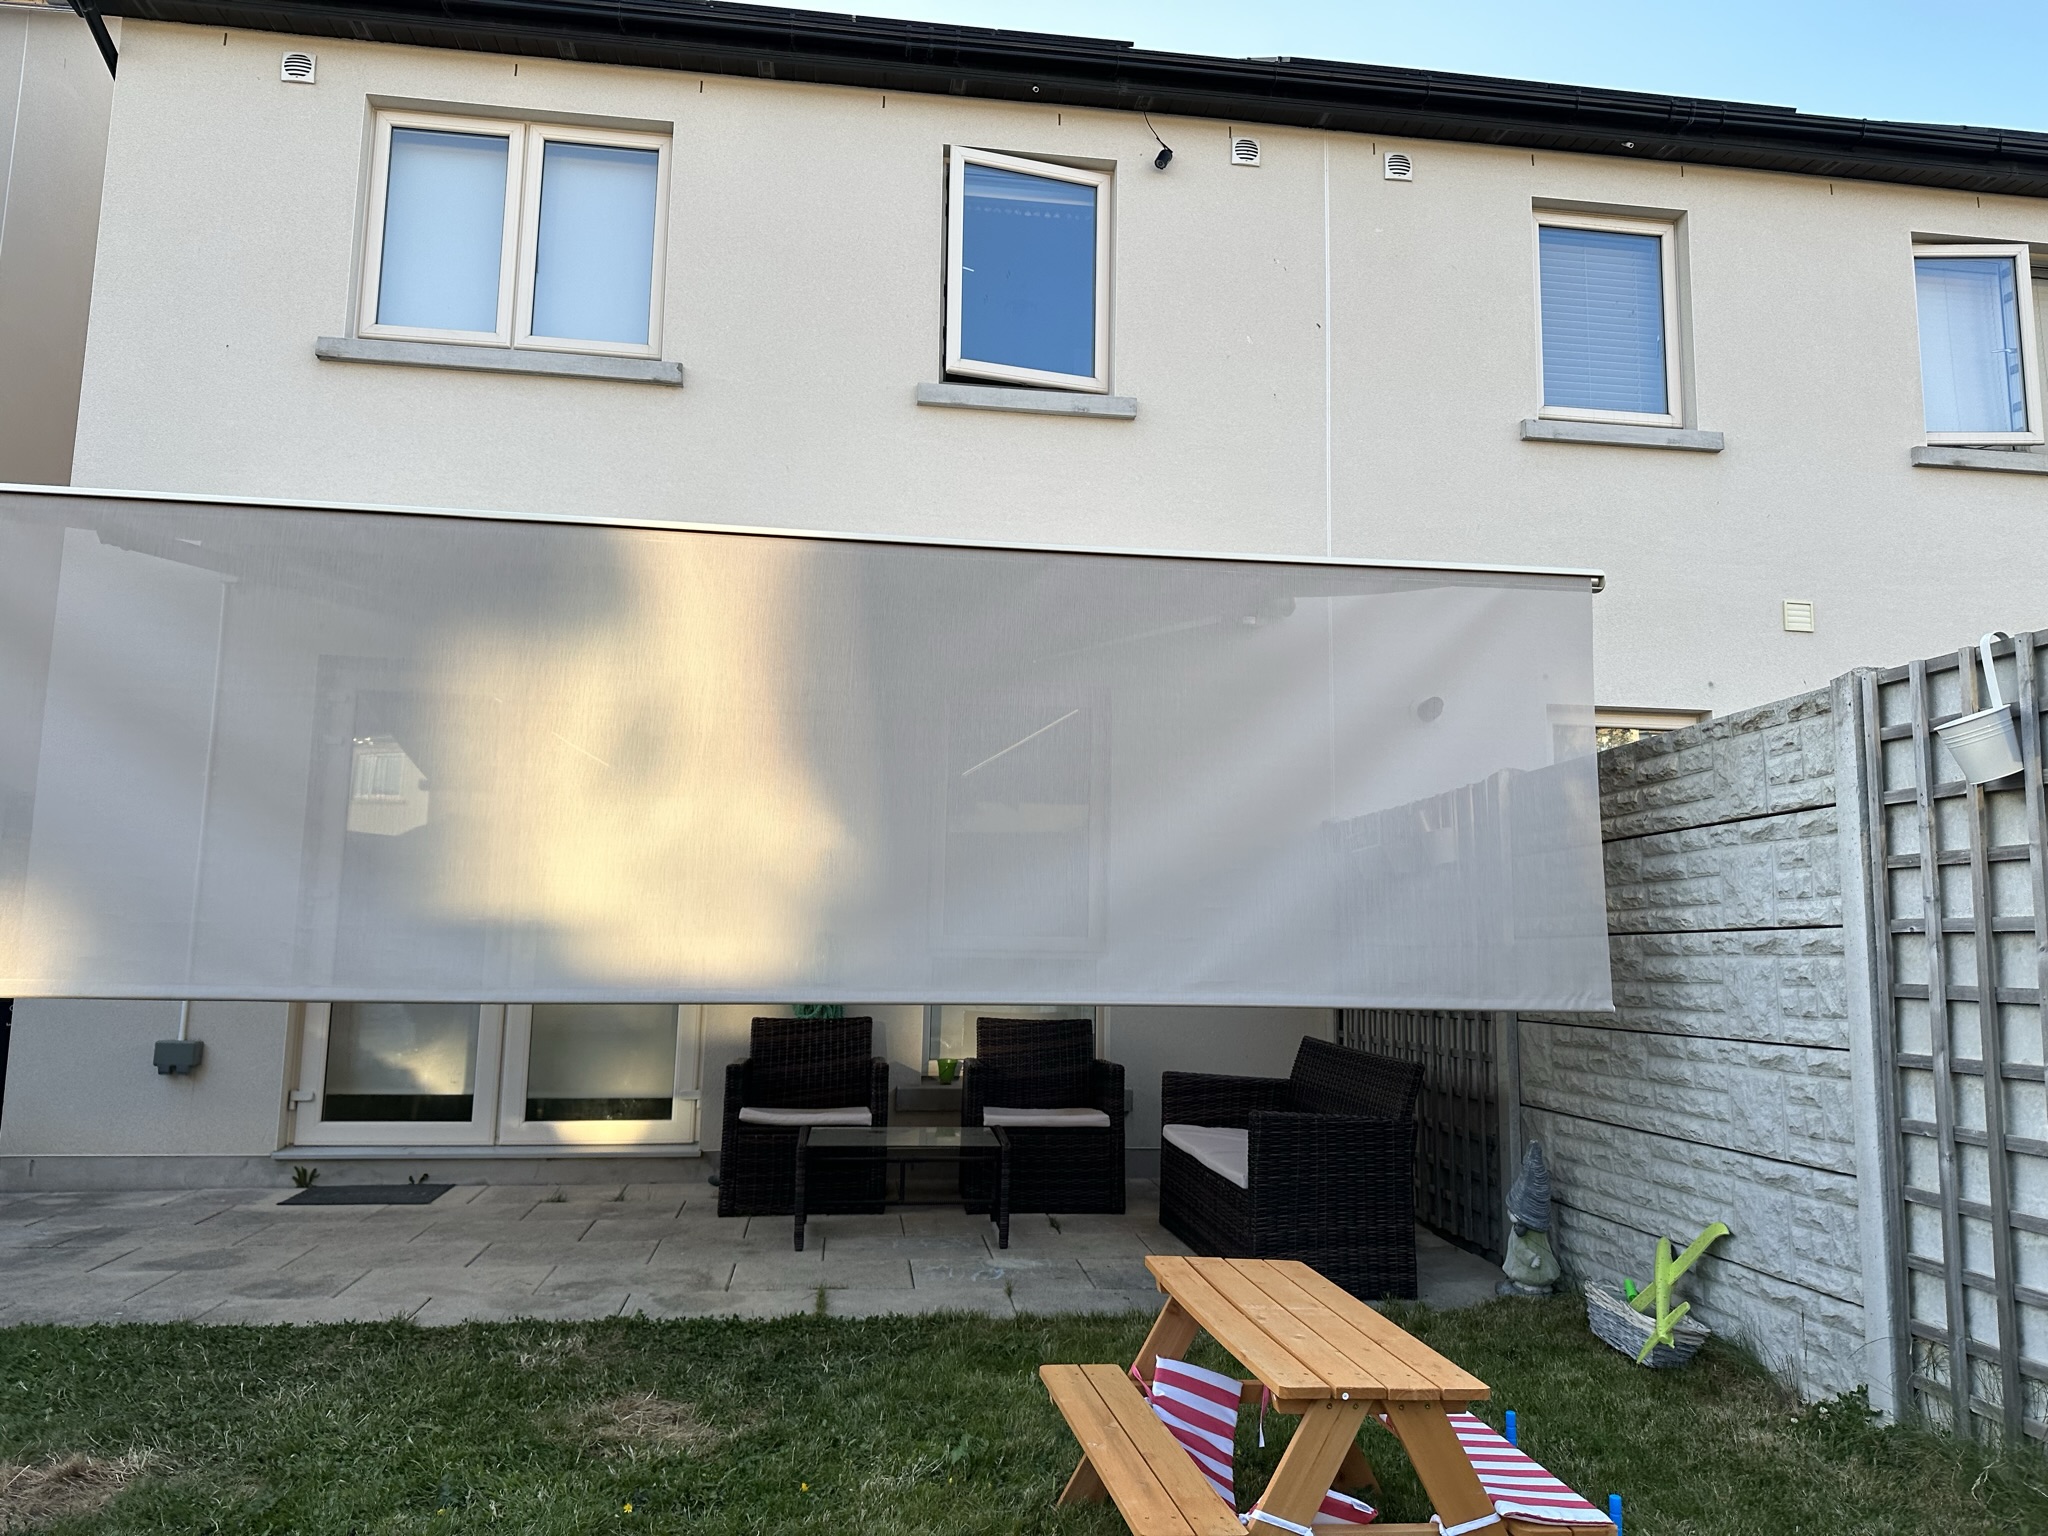 Awning PRO LED with rollable front valance installed in City West co. Dublin